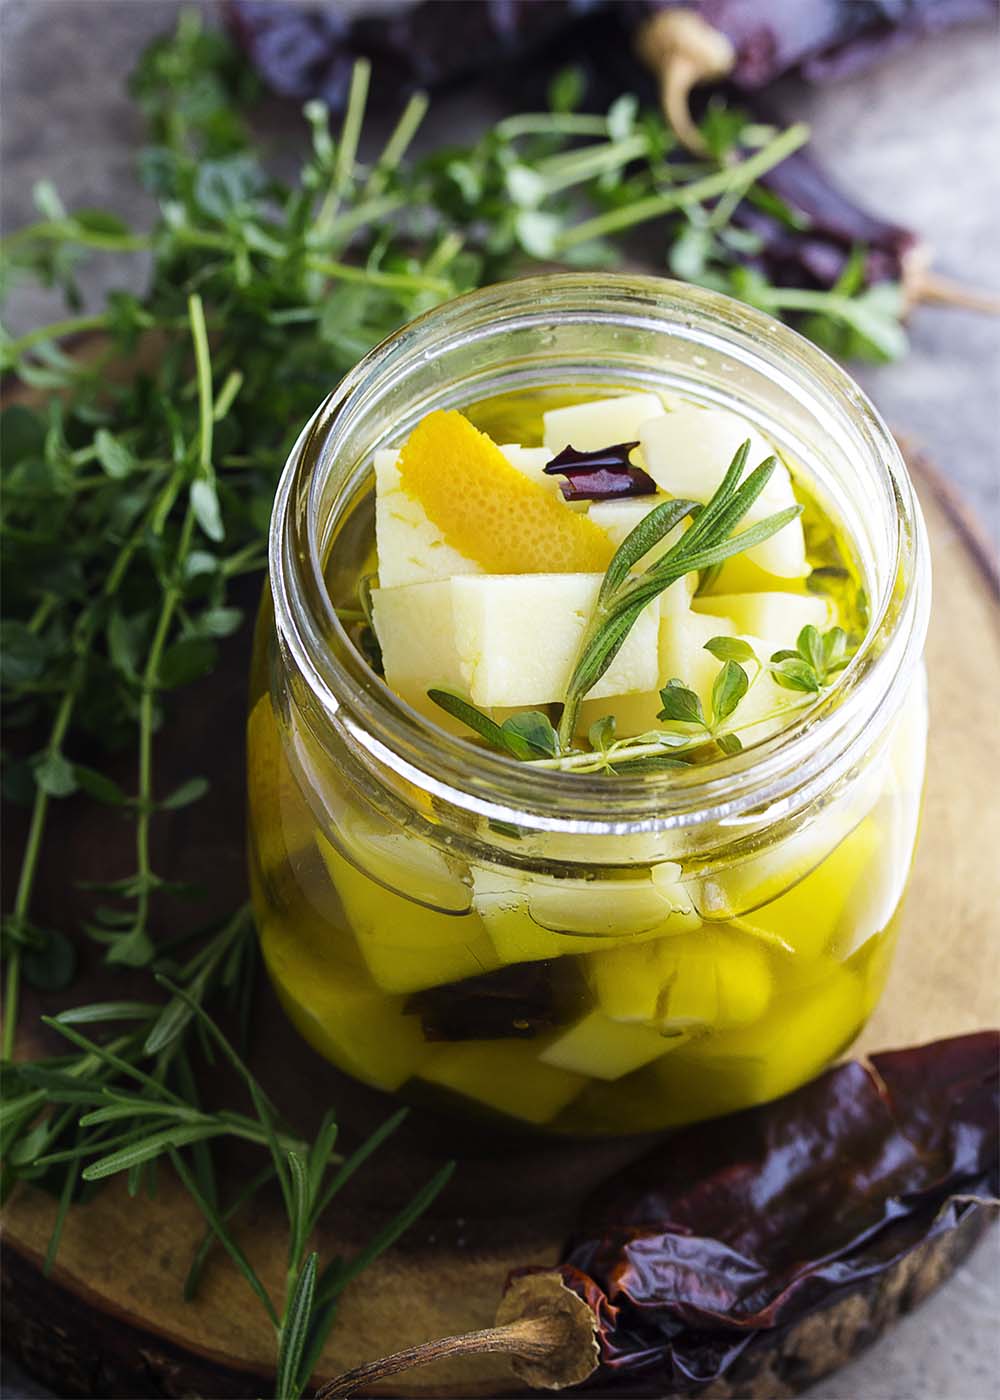 Cubes of Spanish manchego cheese is marinated in a mixture of hot peppers, olive oil, and herbs in this easy manchego tapas recipe. | justalittlebitofbacon.com